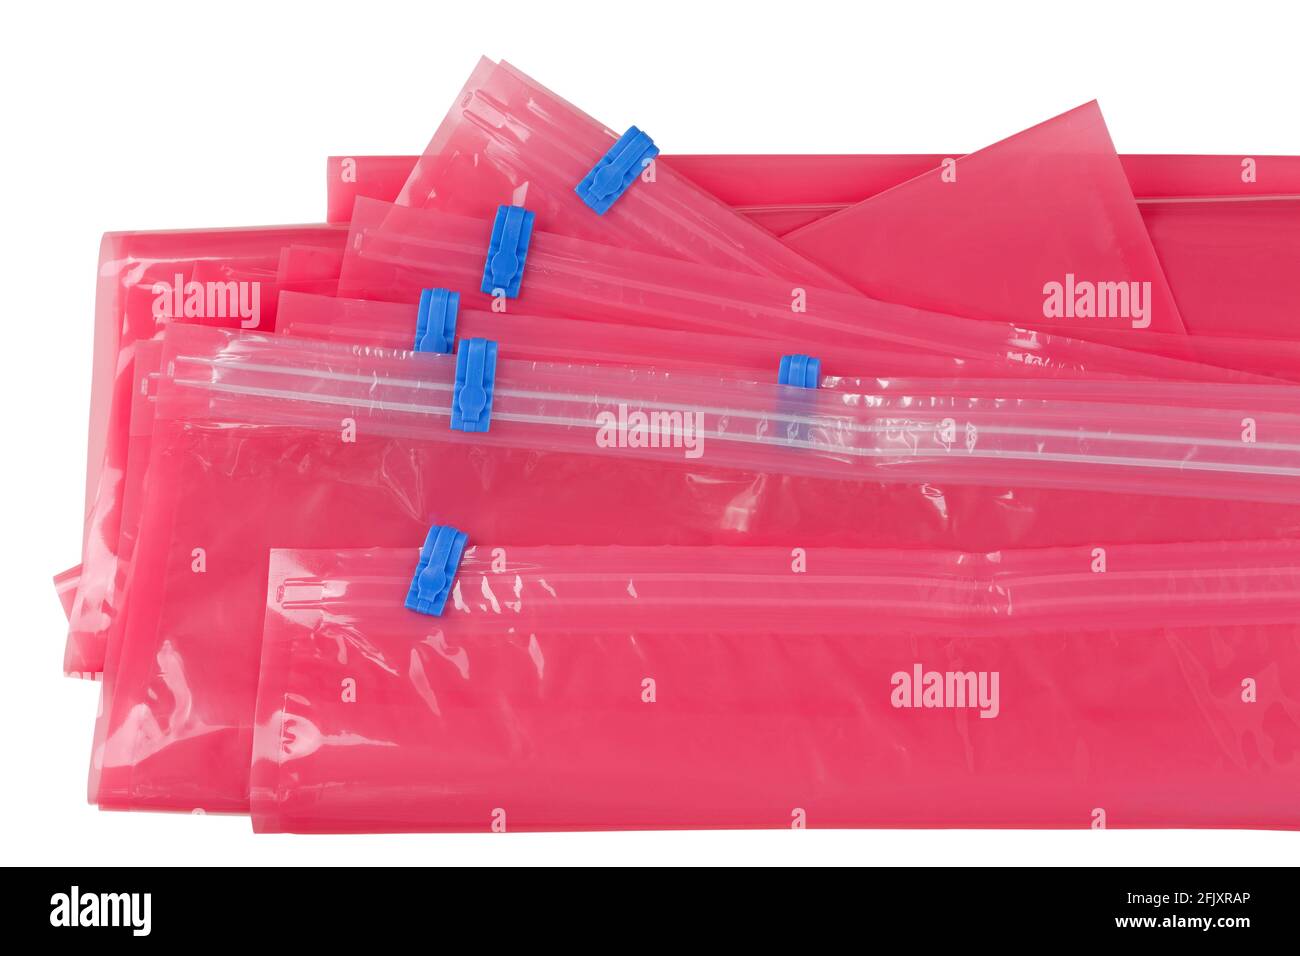 https://c8.alamy.com/comp/2FJXRAP/closeup-pink-plastic-zip-lock-bag-with-blue-sealing-to-pack-store-cloths-and-resealable-isolated-on-white-background-2FJXRAP.jpg